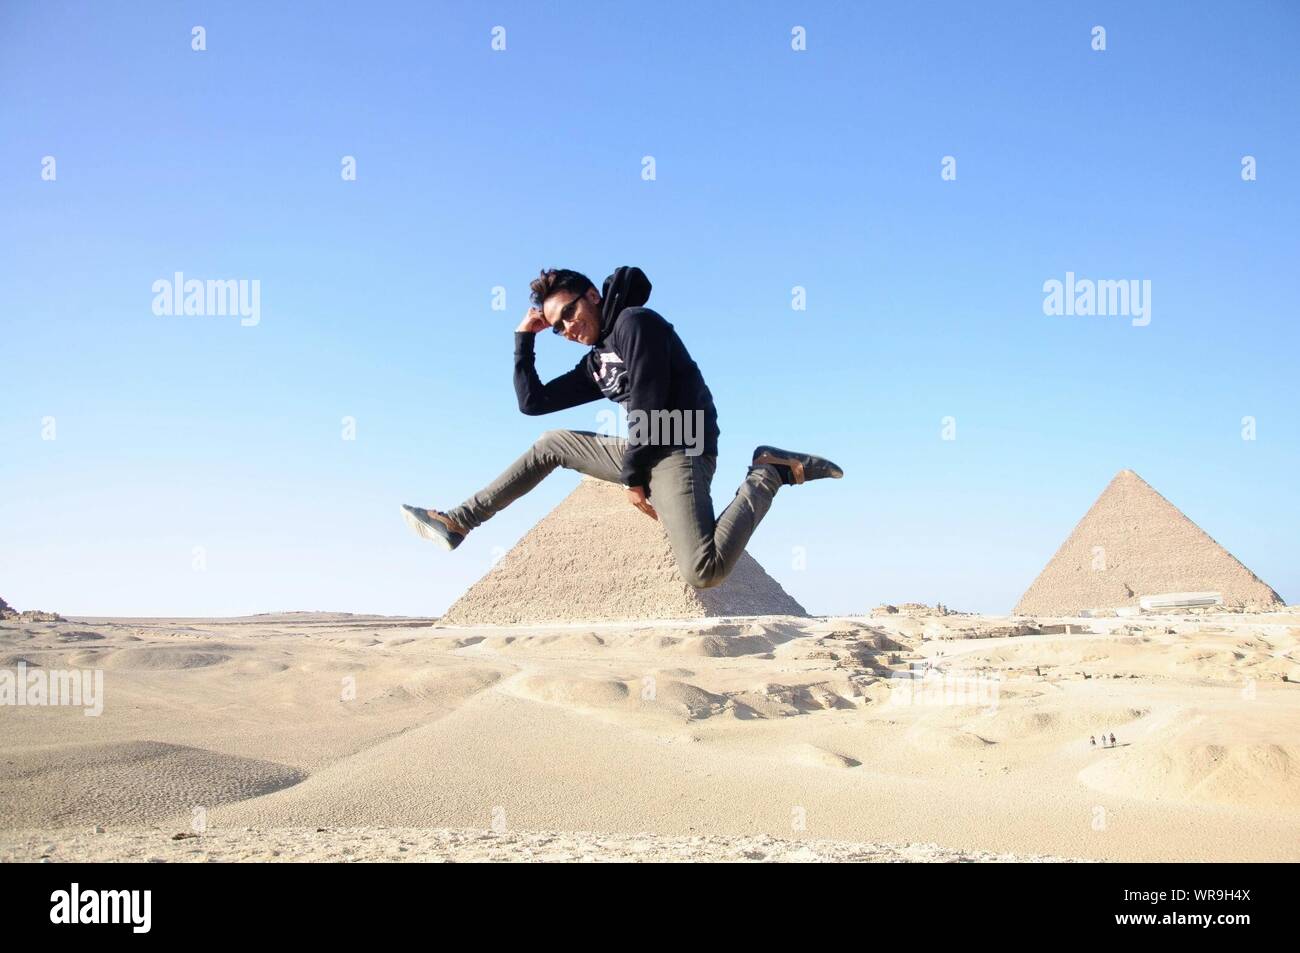 Young Man Wearing Hooded Shirt And Sunglasses In Mid-air At Giza Pyramids Against Clear Sky Stock Photo